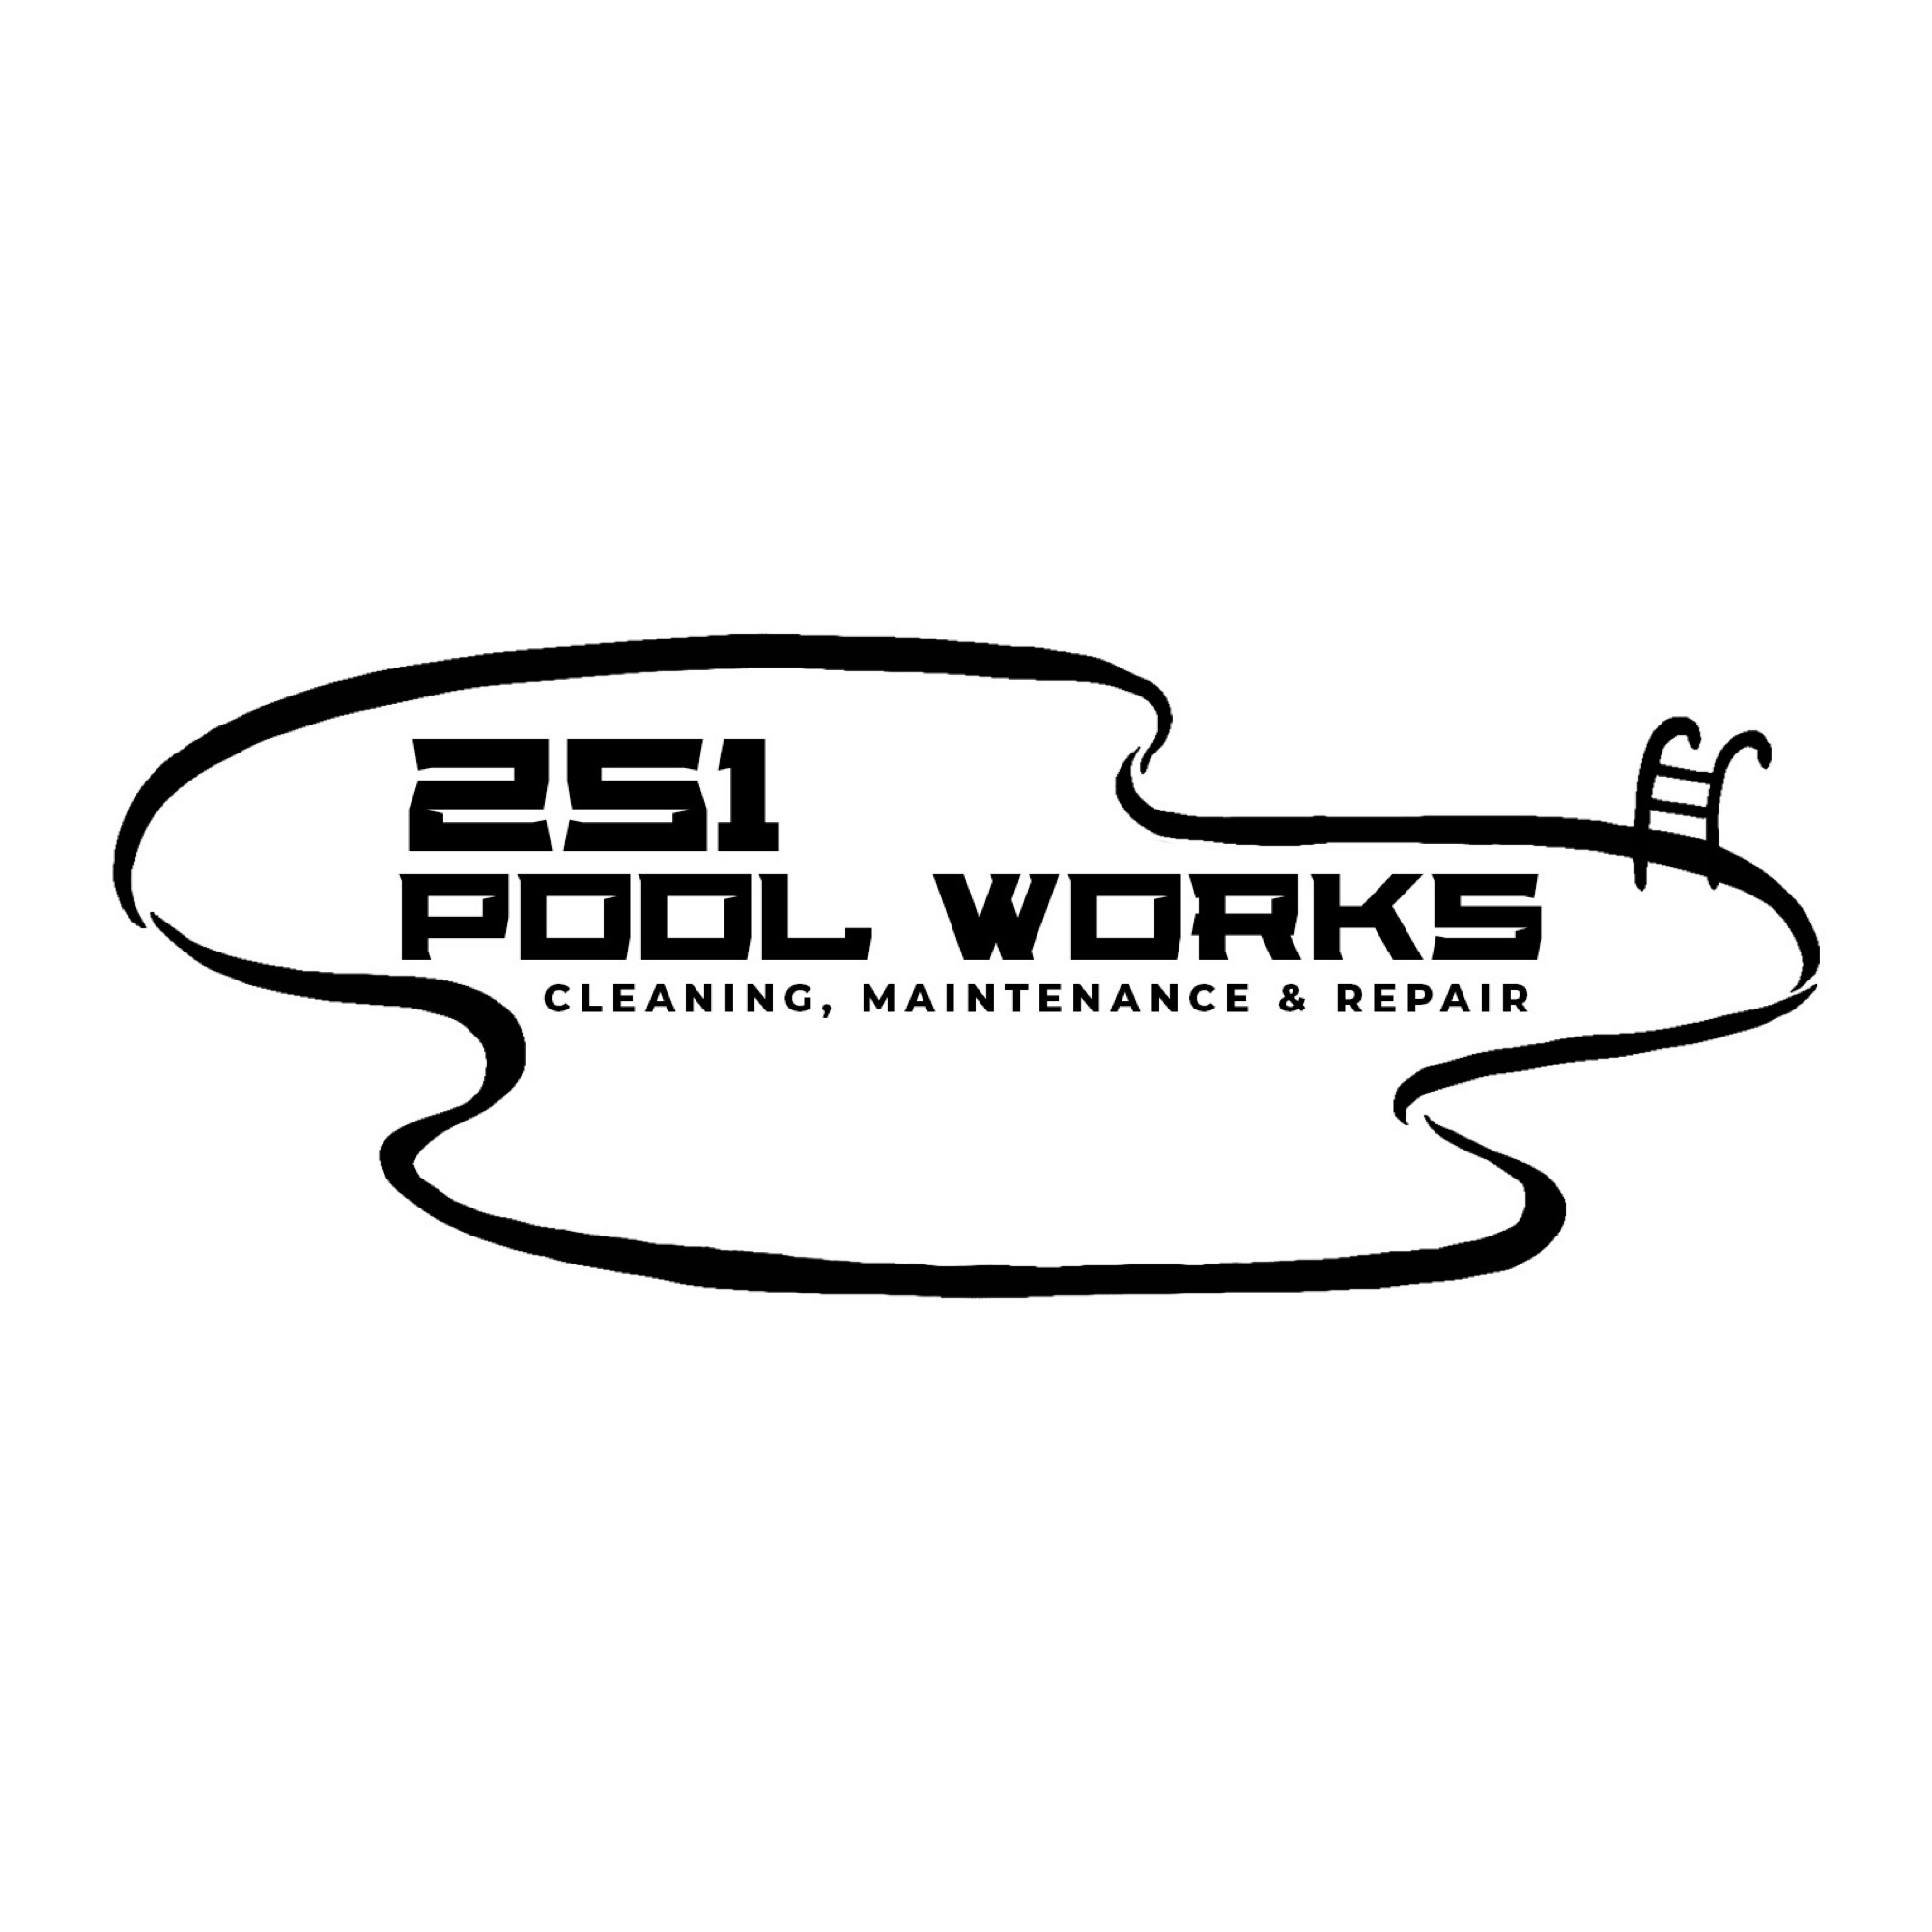 251 PoolWorks Logo